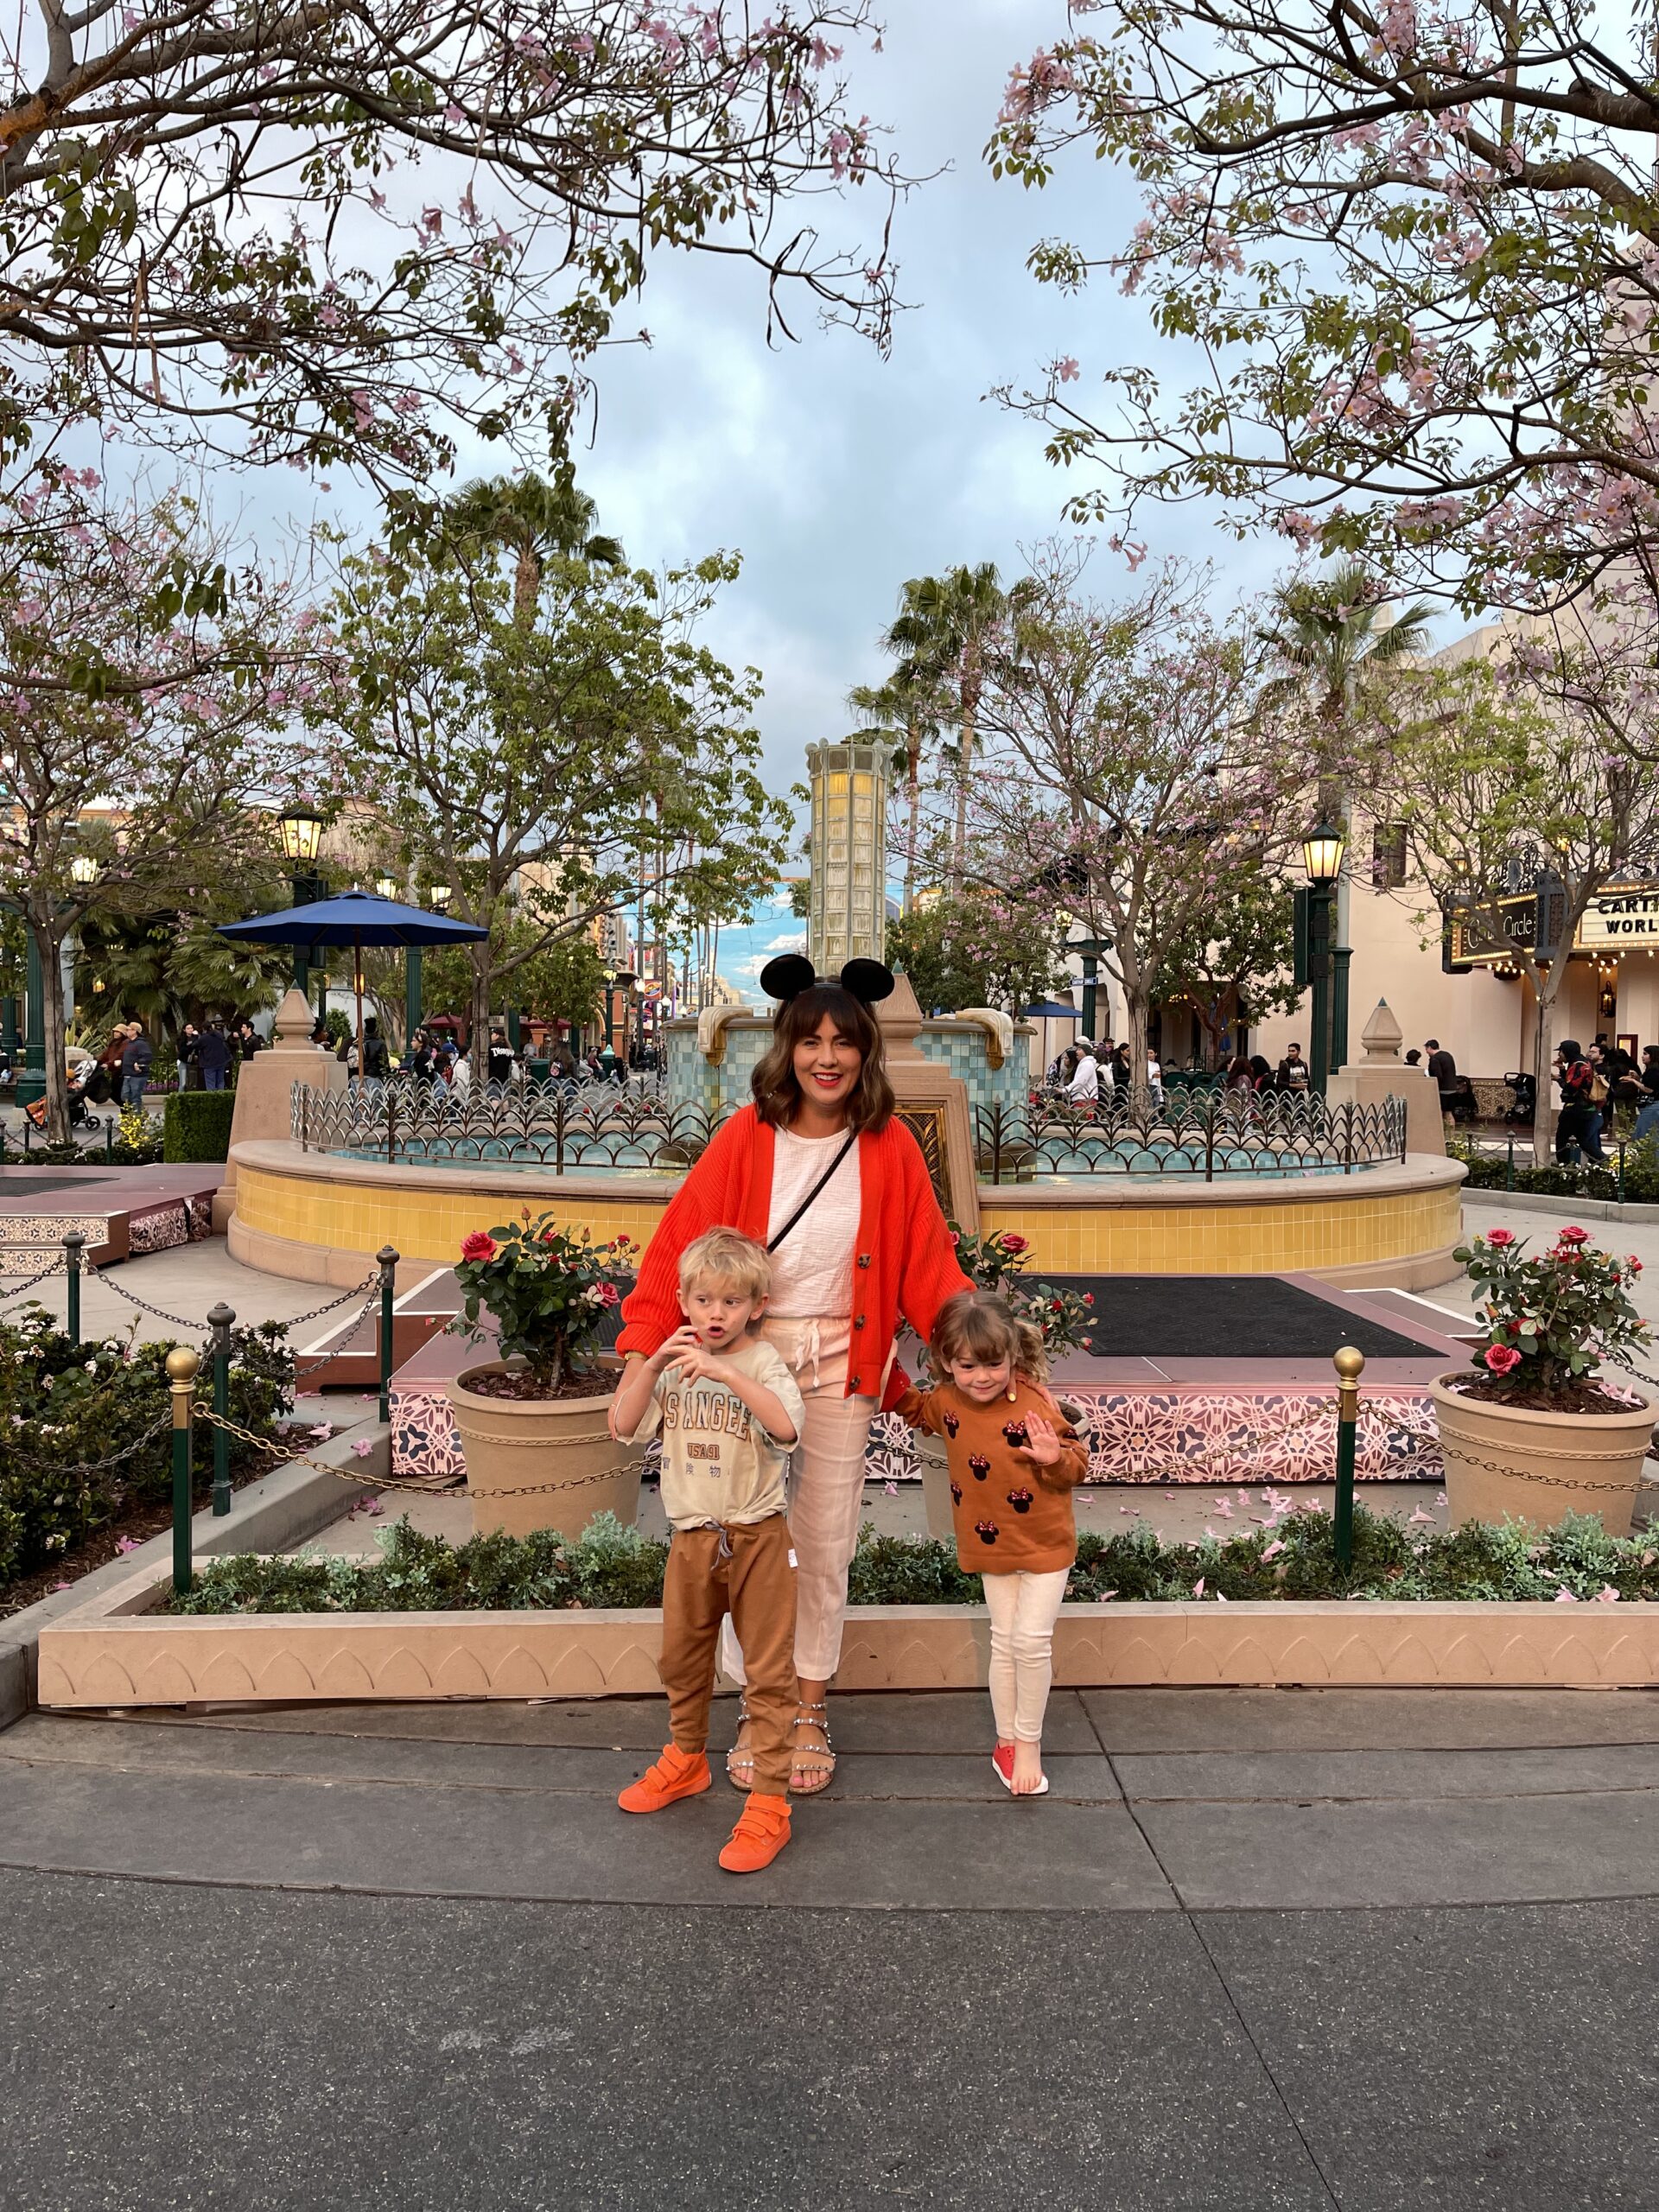 Justin Pasutto's and Jillian Harris' Favourite Things to Do in Disney